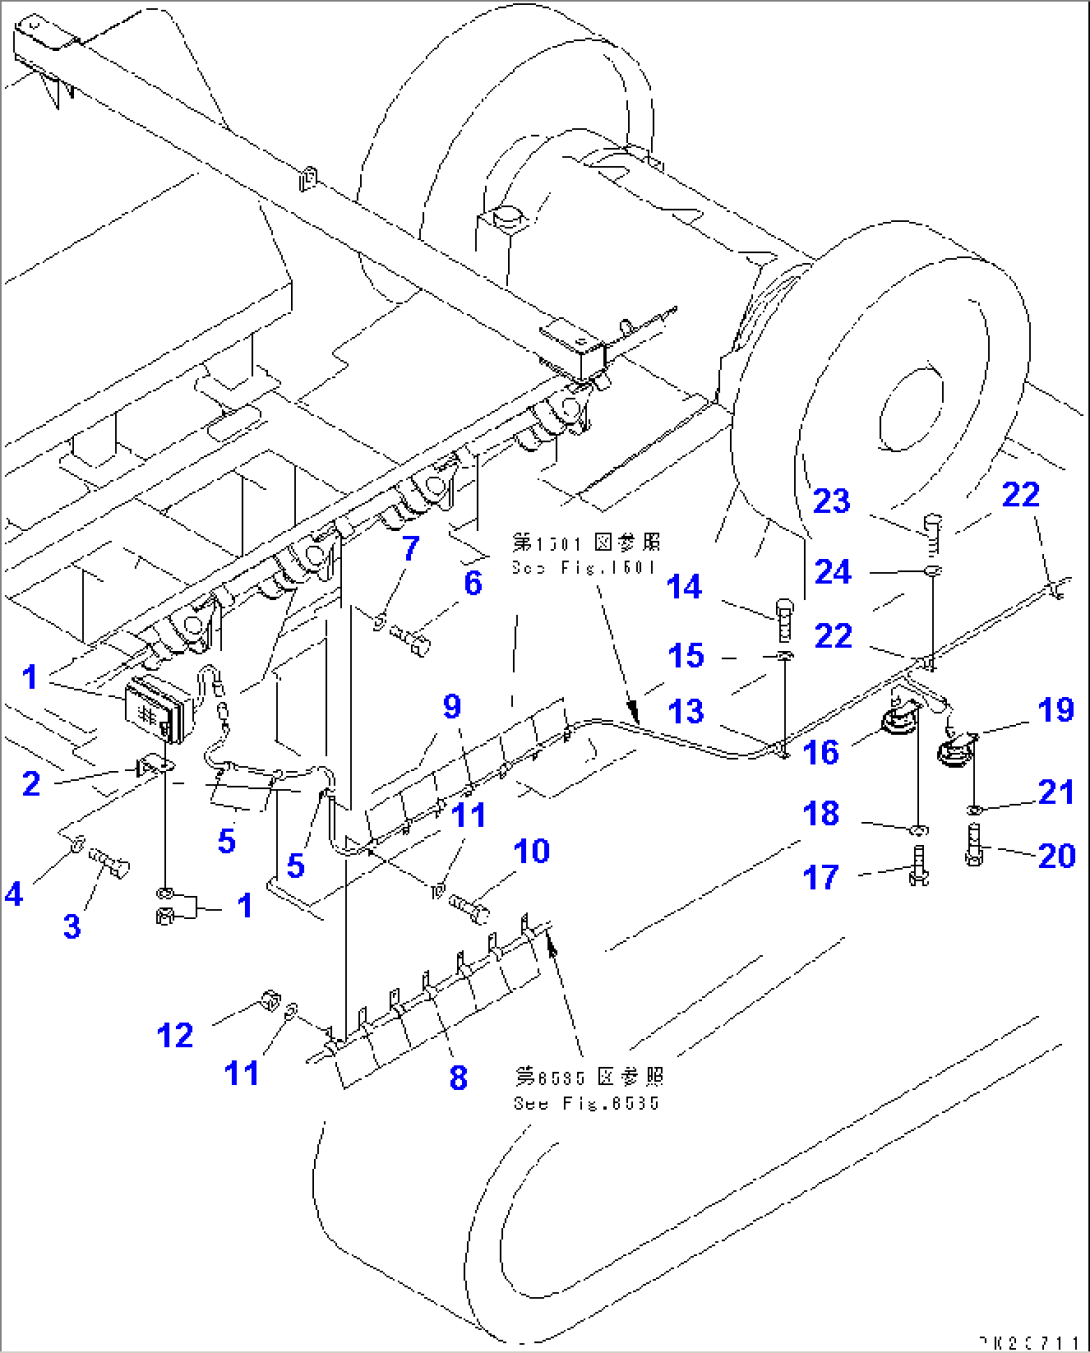 ELECTRICAL SYSTEM (2/4) (HEAD LAMP AND HORN)